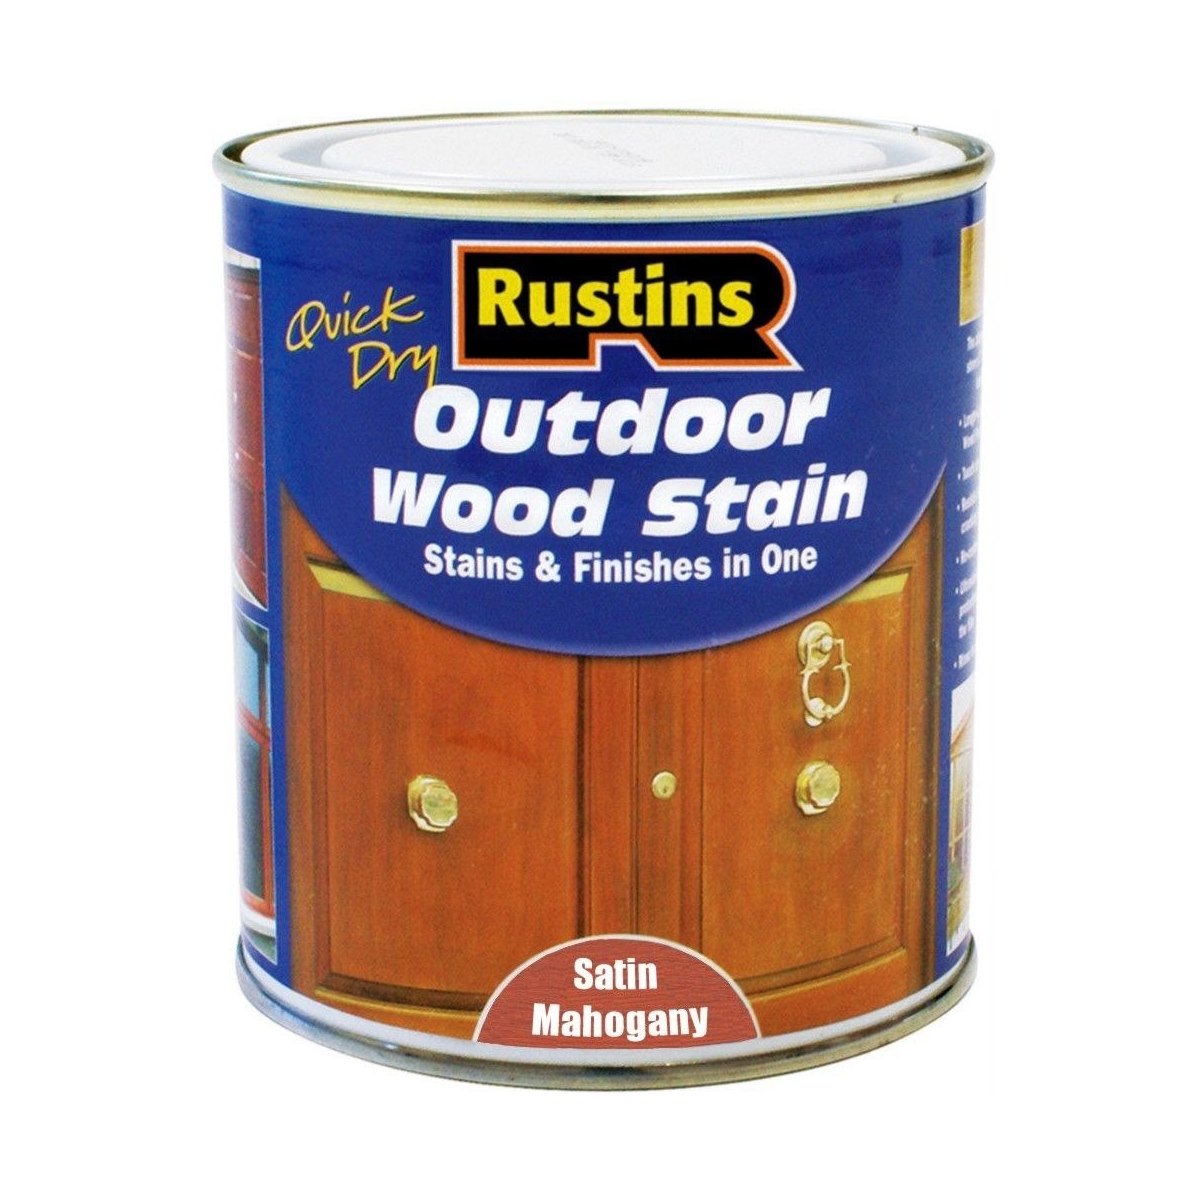 Rustins Quick Dry Outdoor Wood Stain Mahogany 500ml